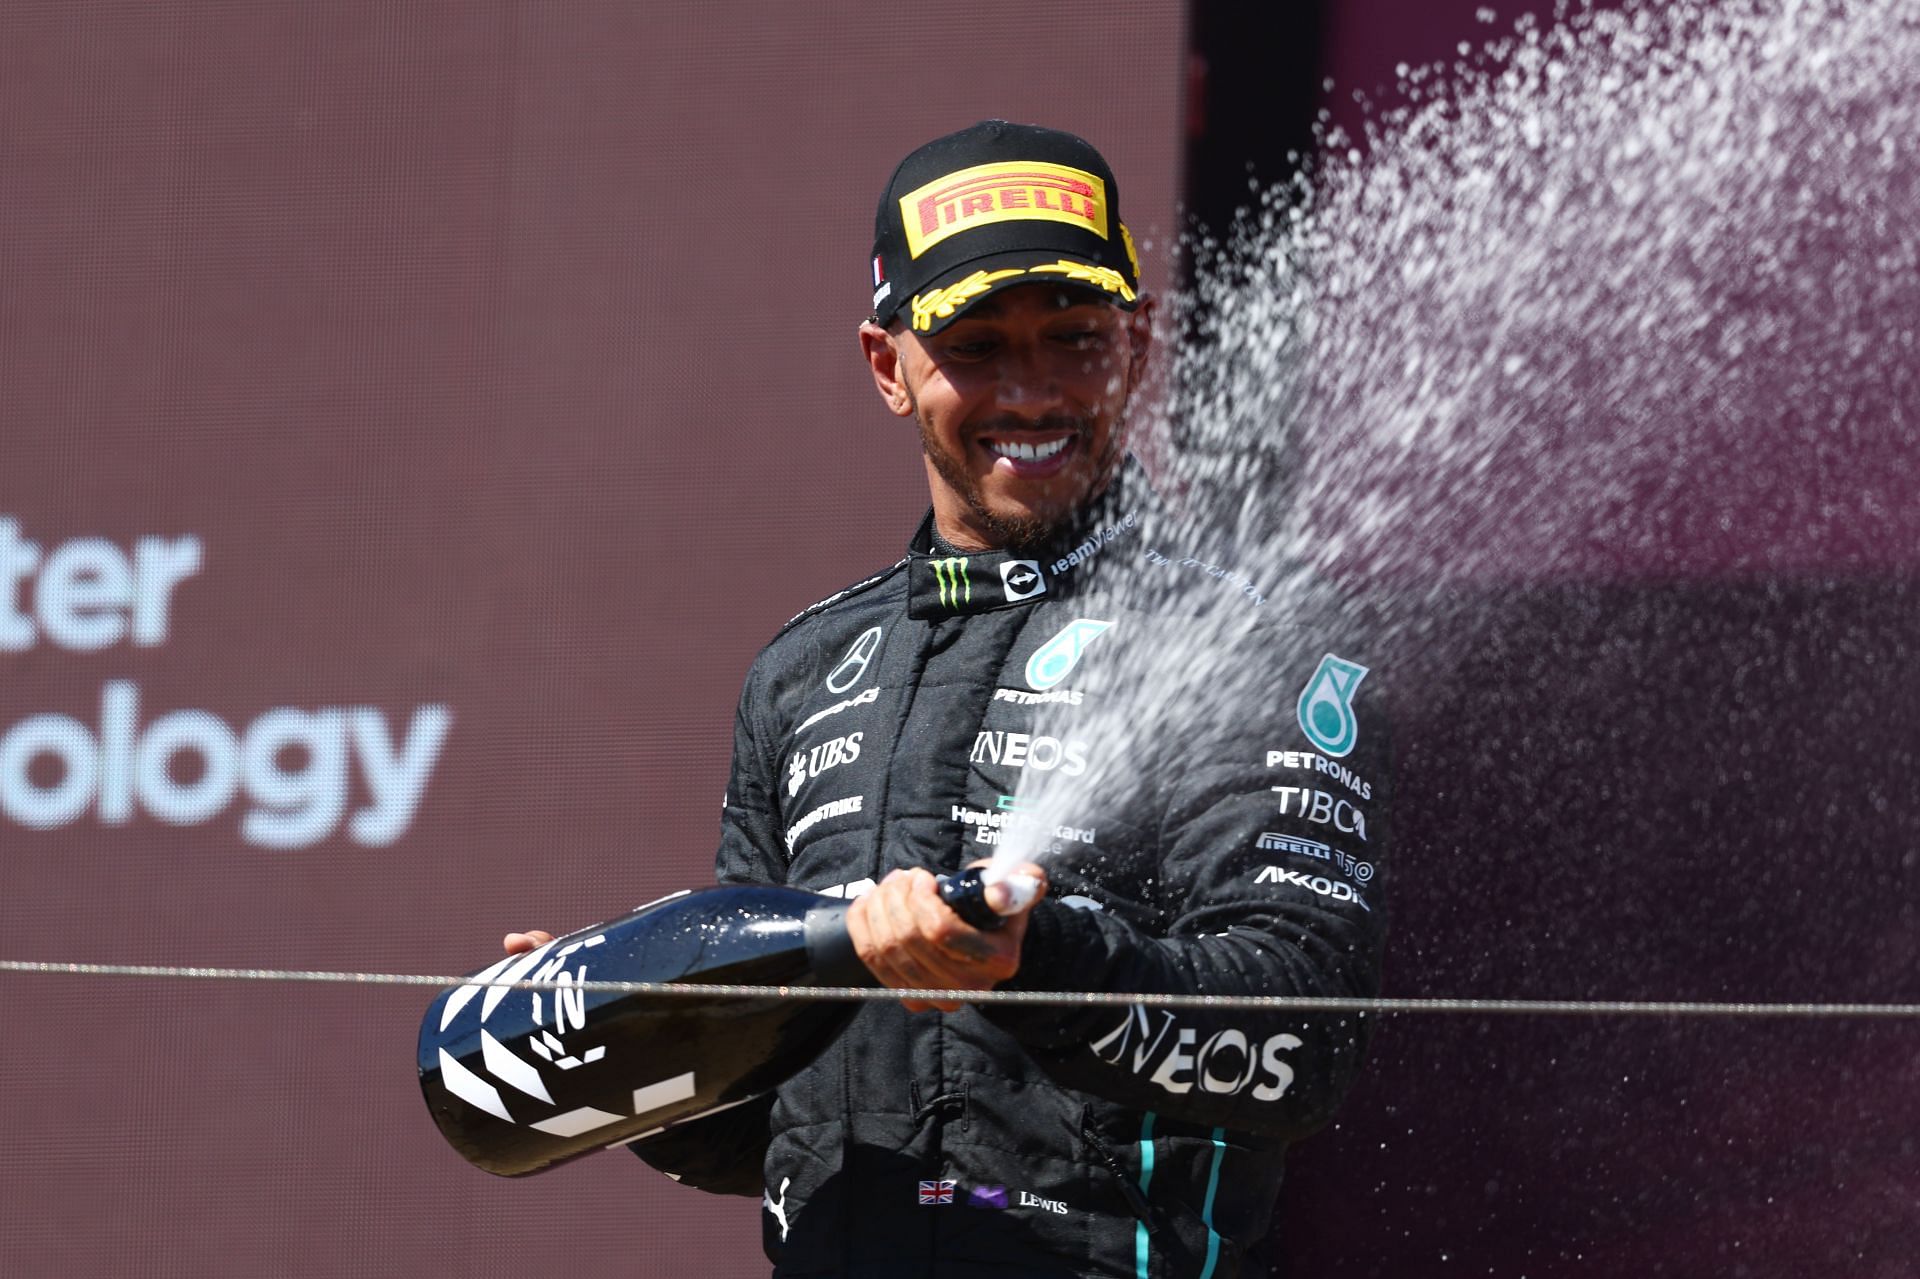 Mercedes driver Lewis Hamilton sprays champagne on the podium after claiming P2 at the 2022 F1 French GP. (Photo by Clive Rose/Getty Images)